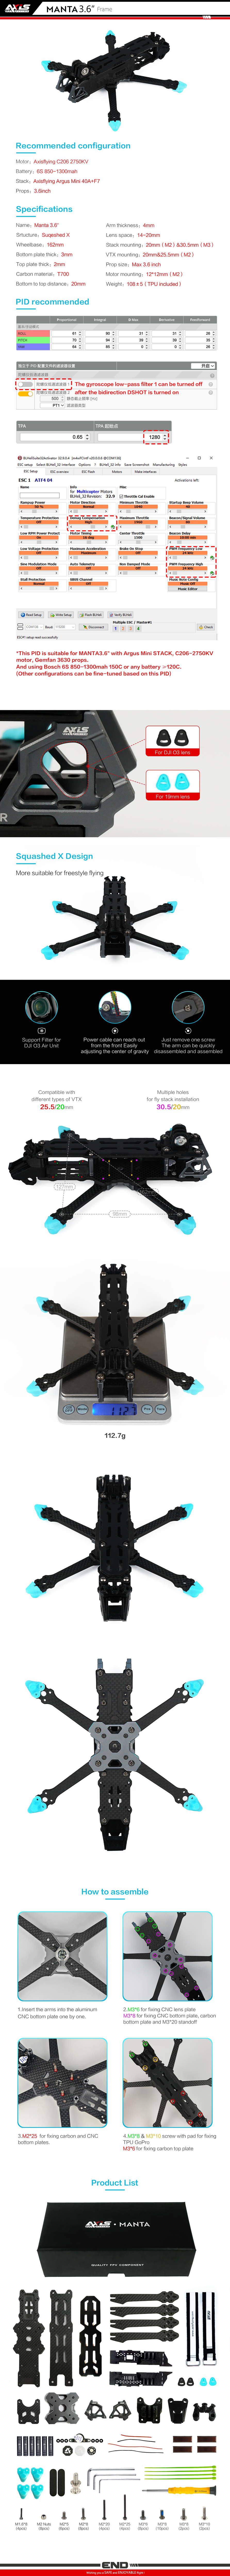 Axisflying Manta 3.6'' / 3.6inch FPV Frame / Squashed X / With side plate  